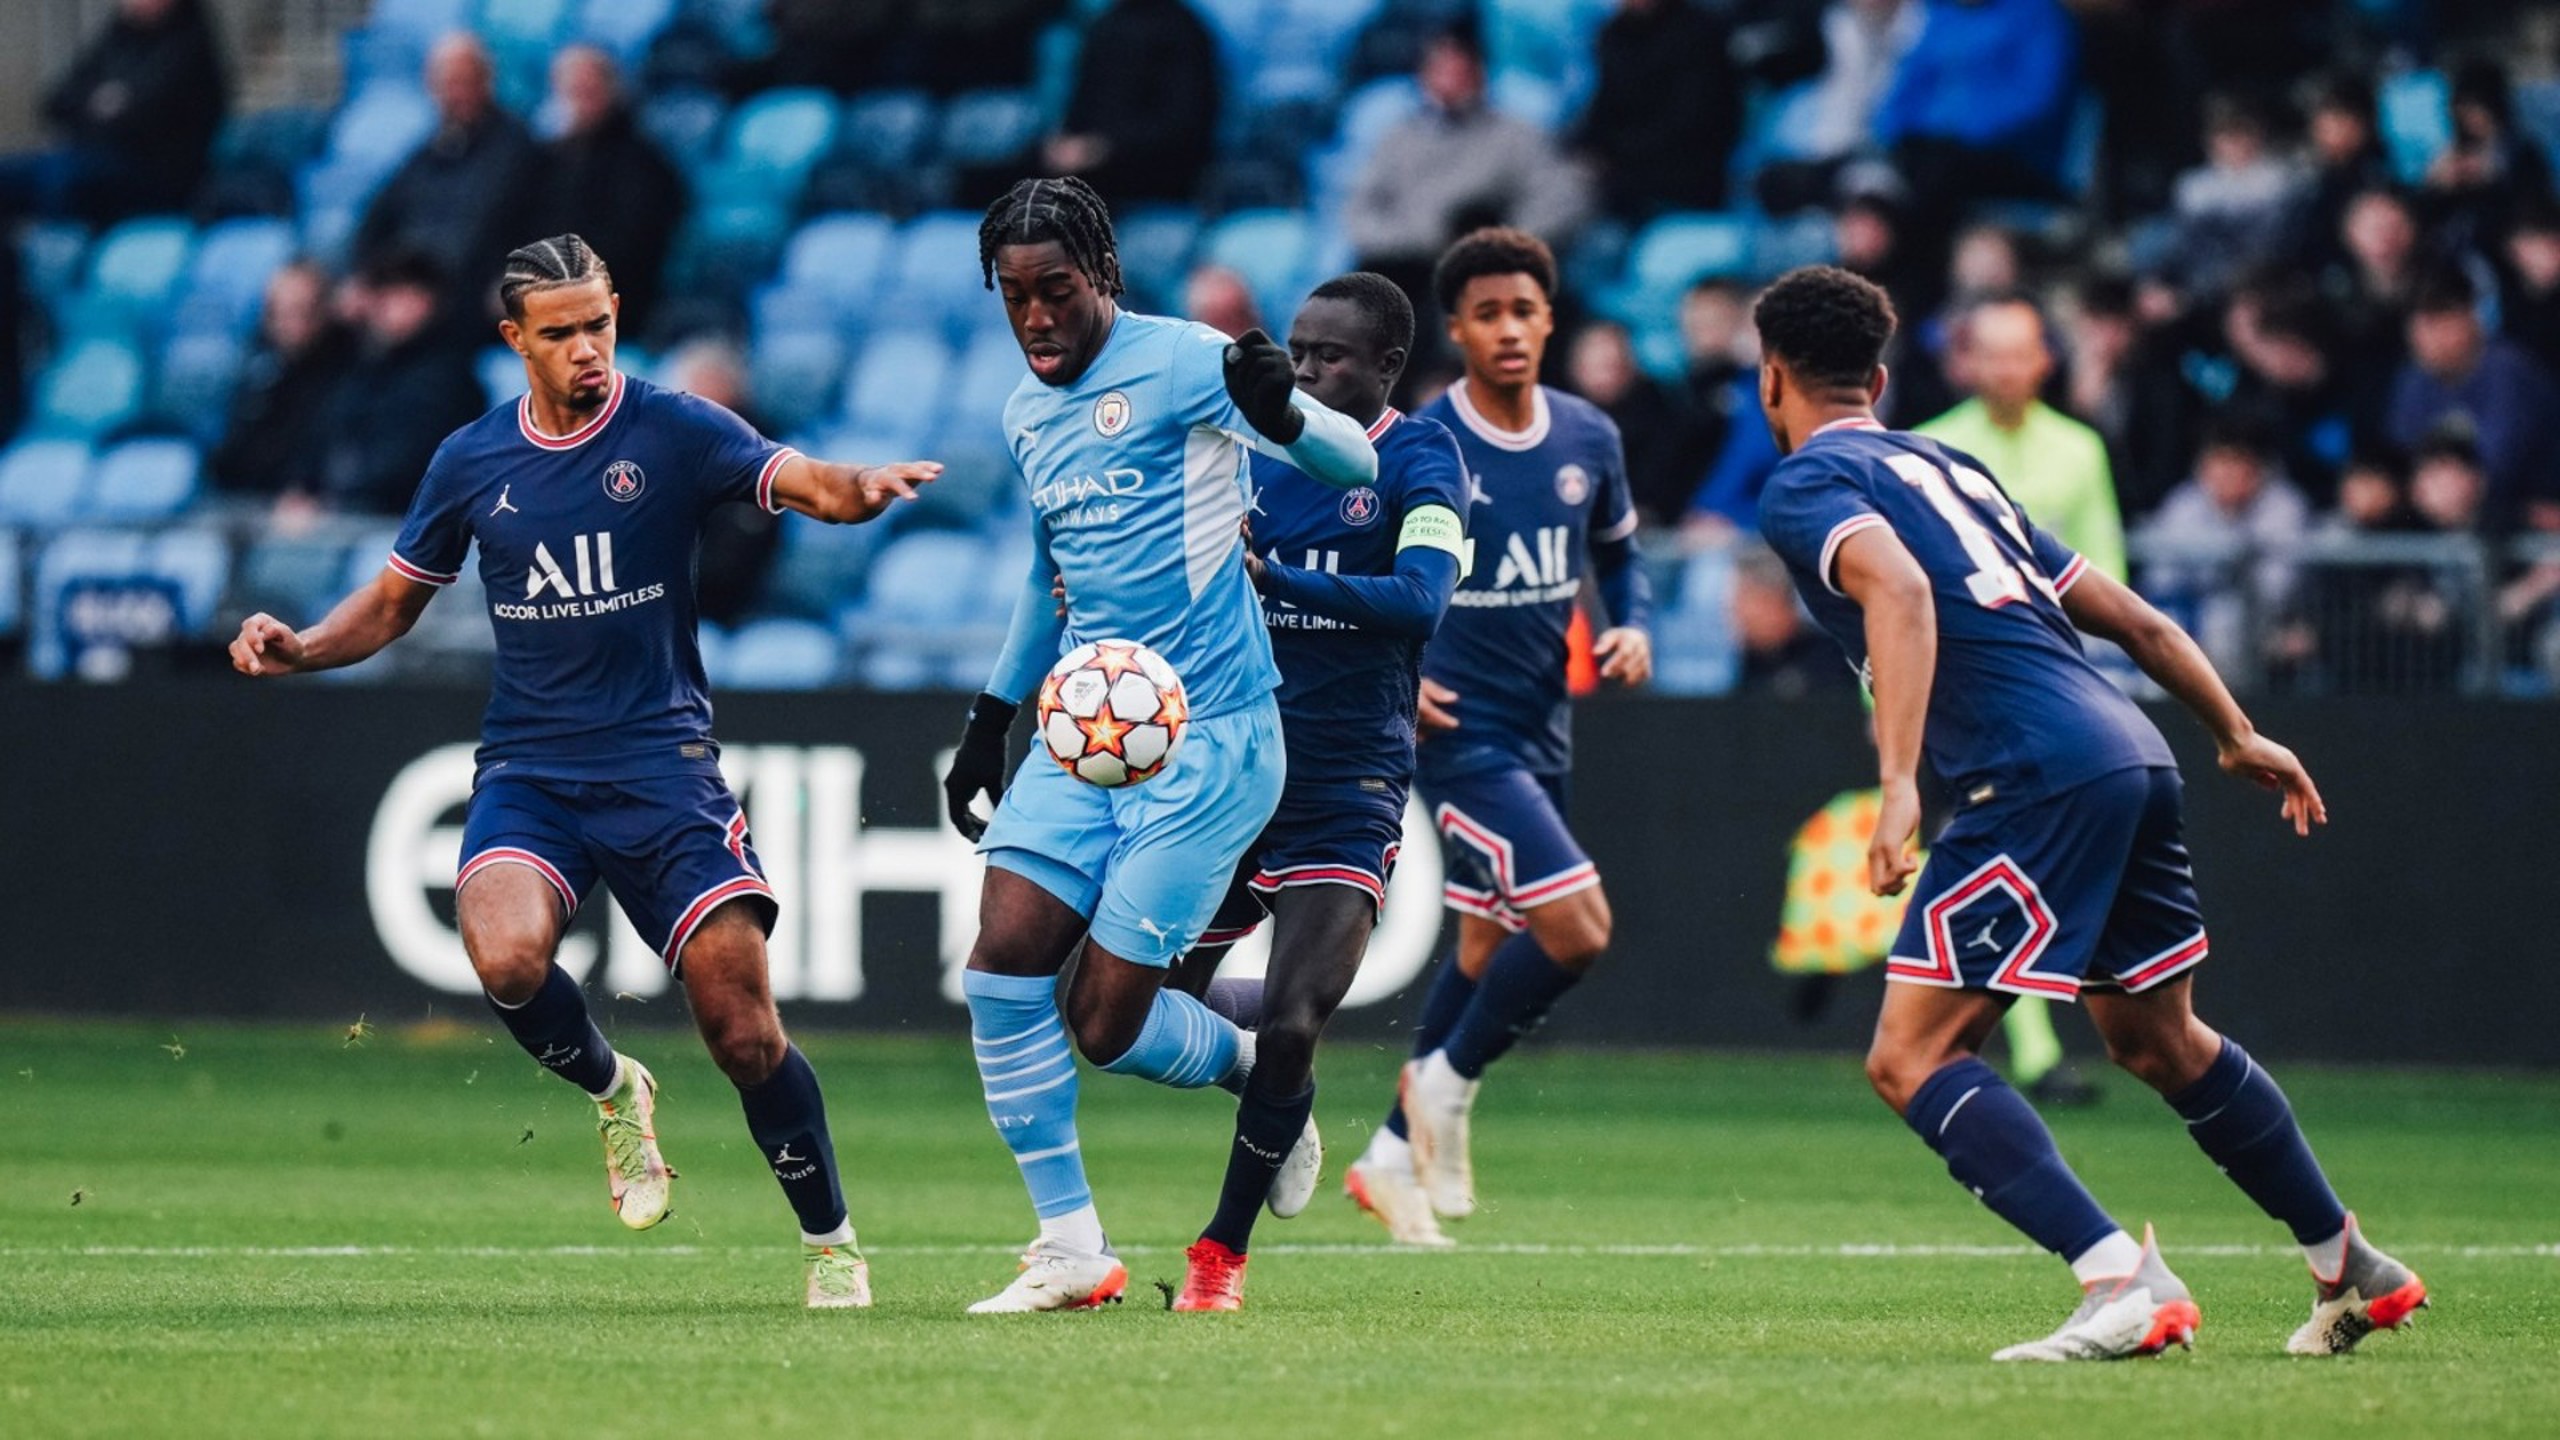 EDS bow out of UEFA Youth League following PSG defeat